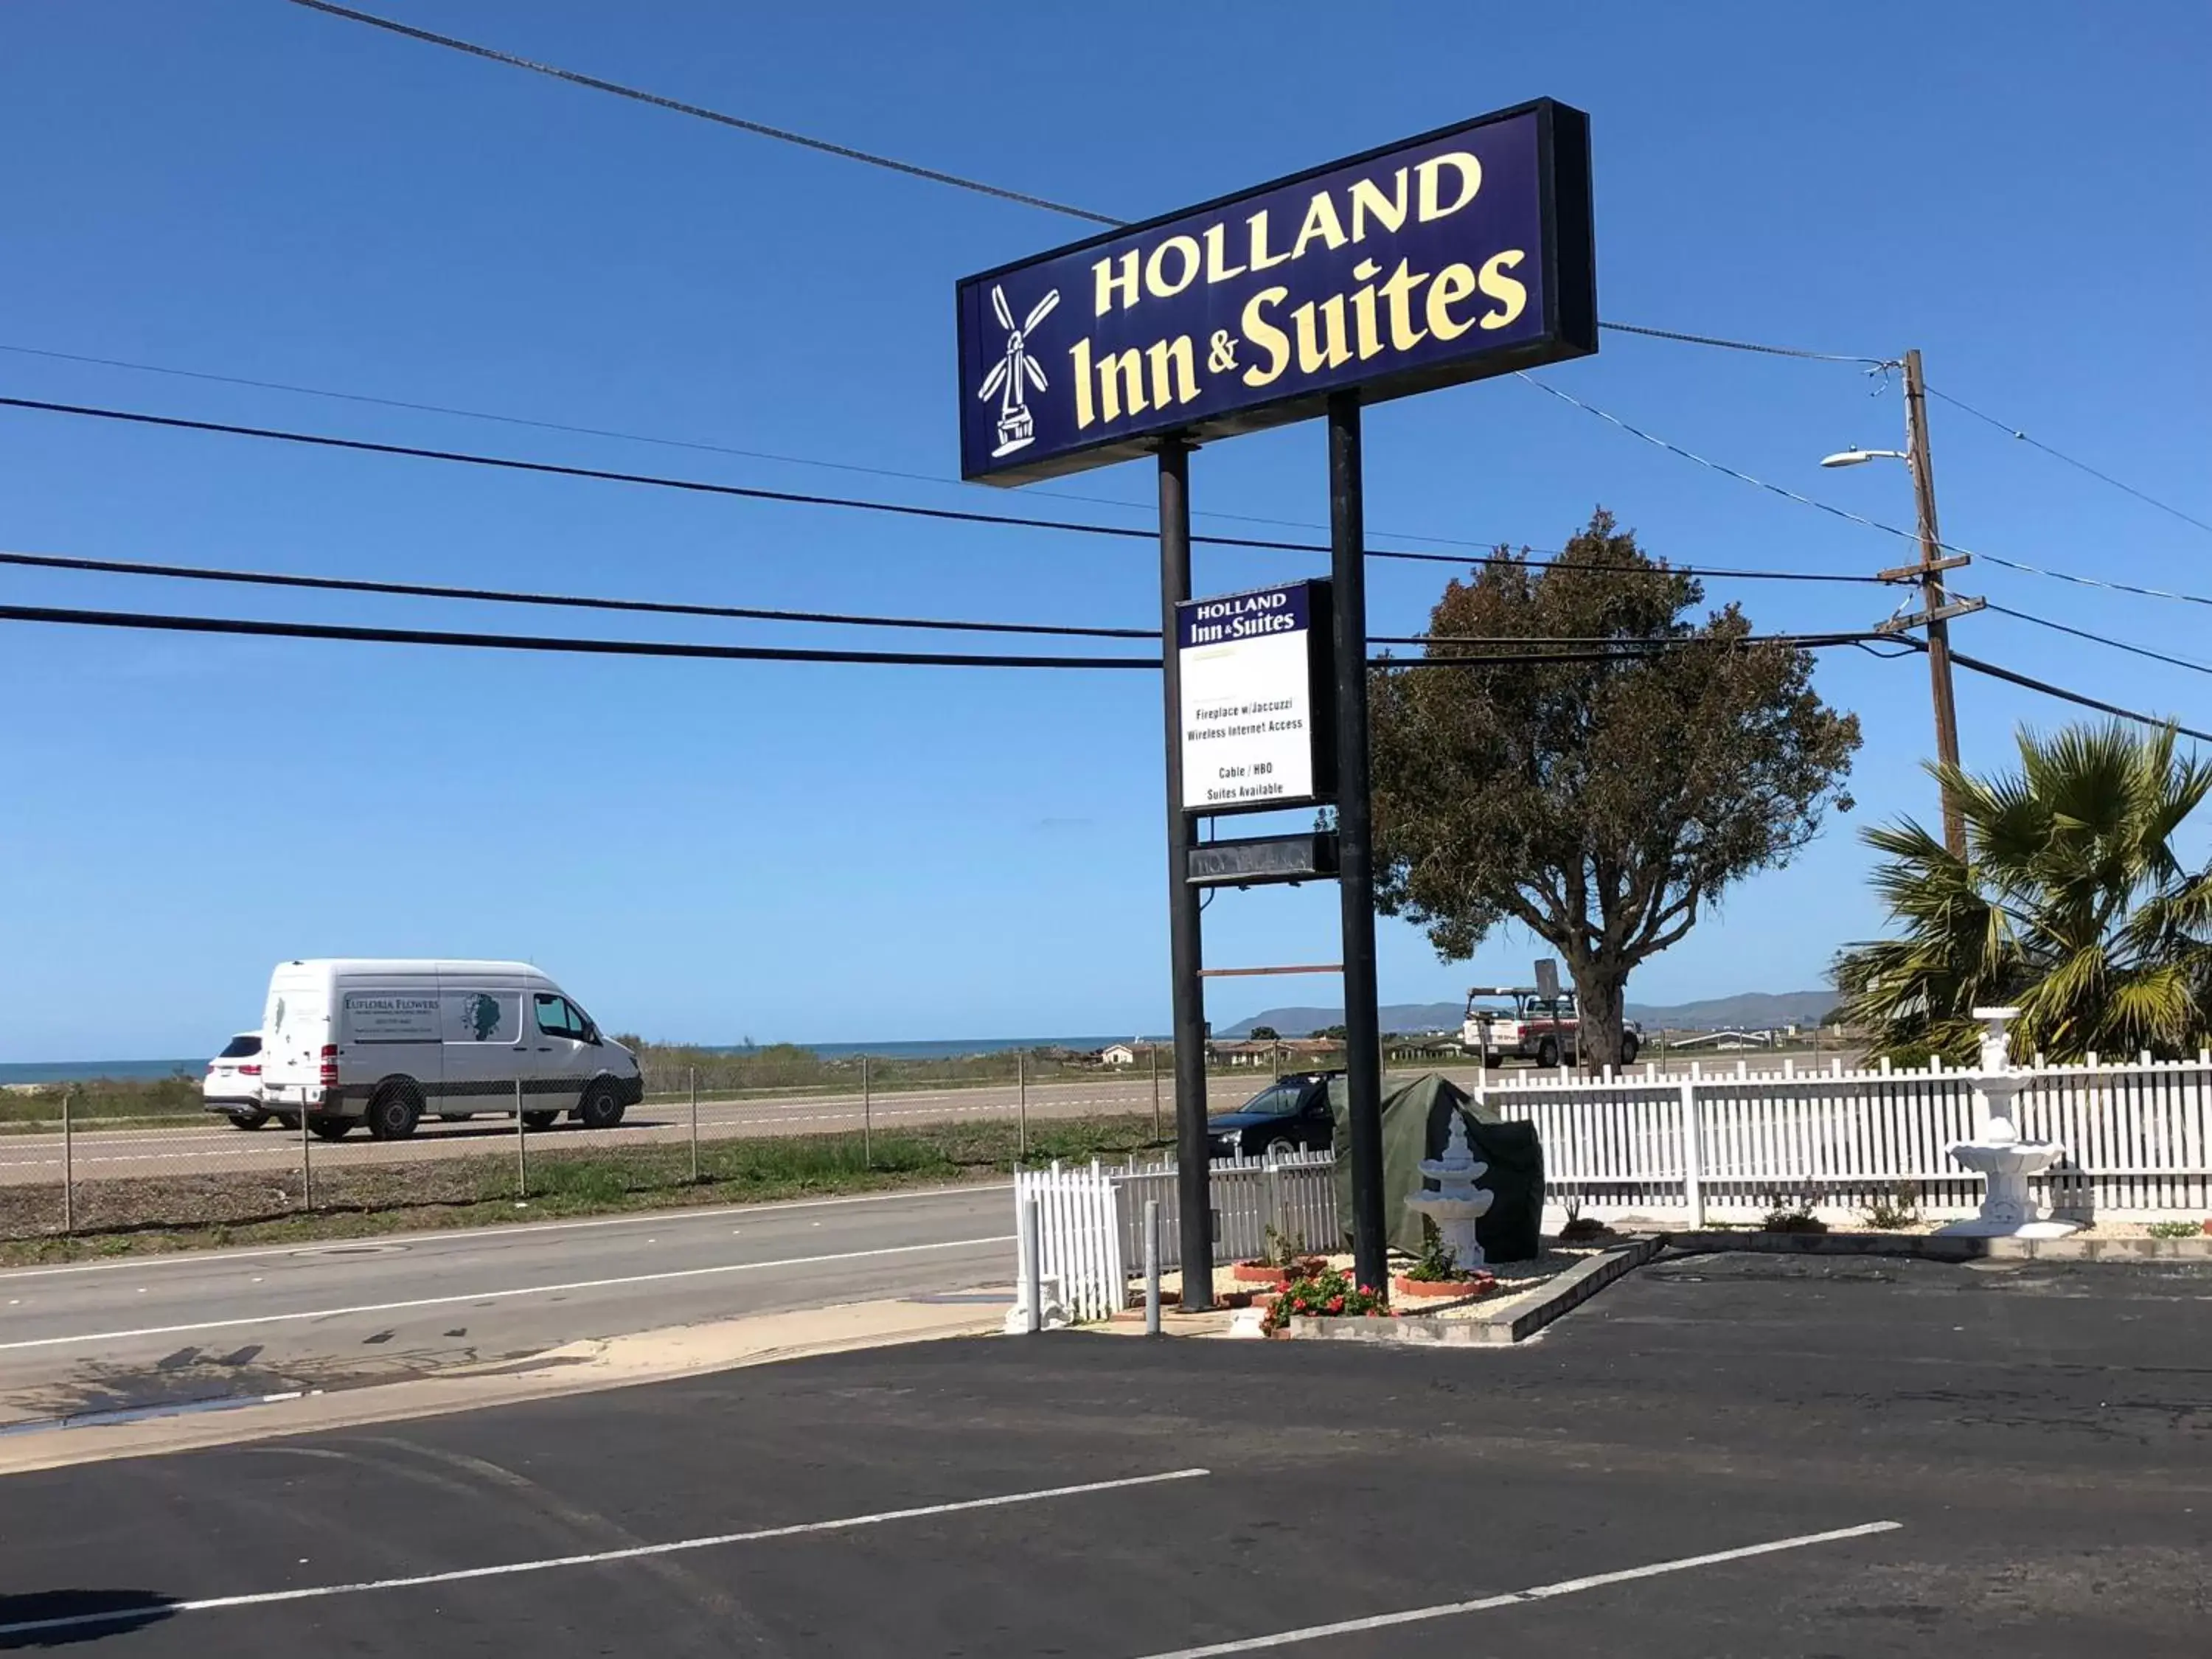 Property building in Holland Inn & Suites